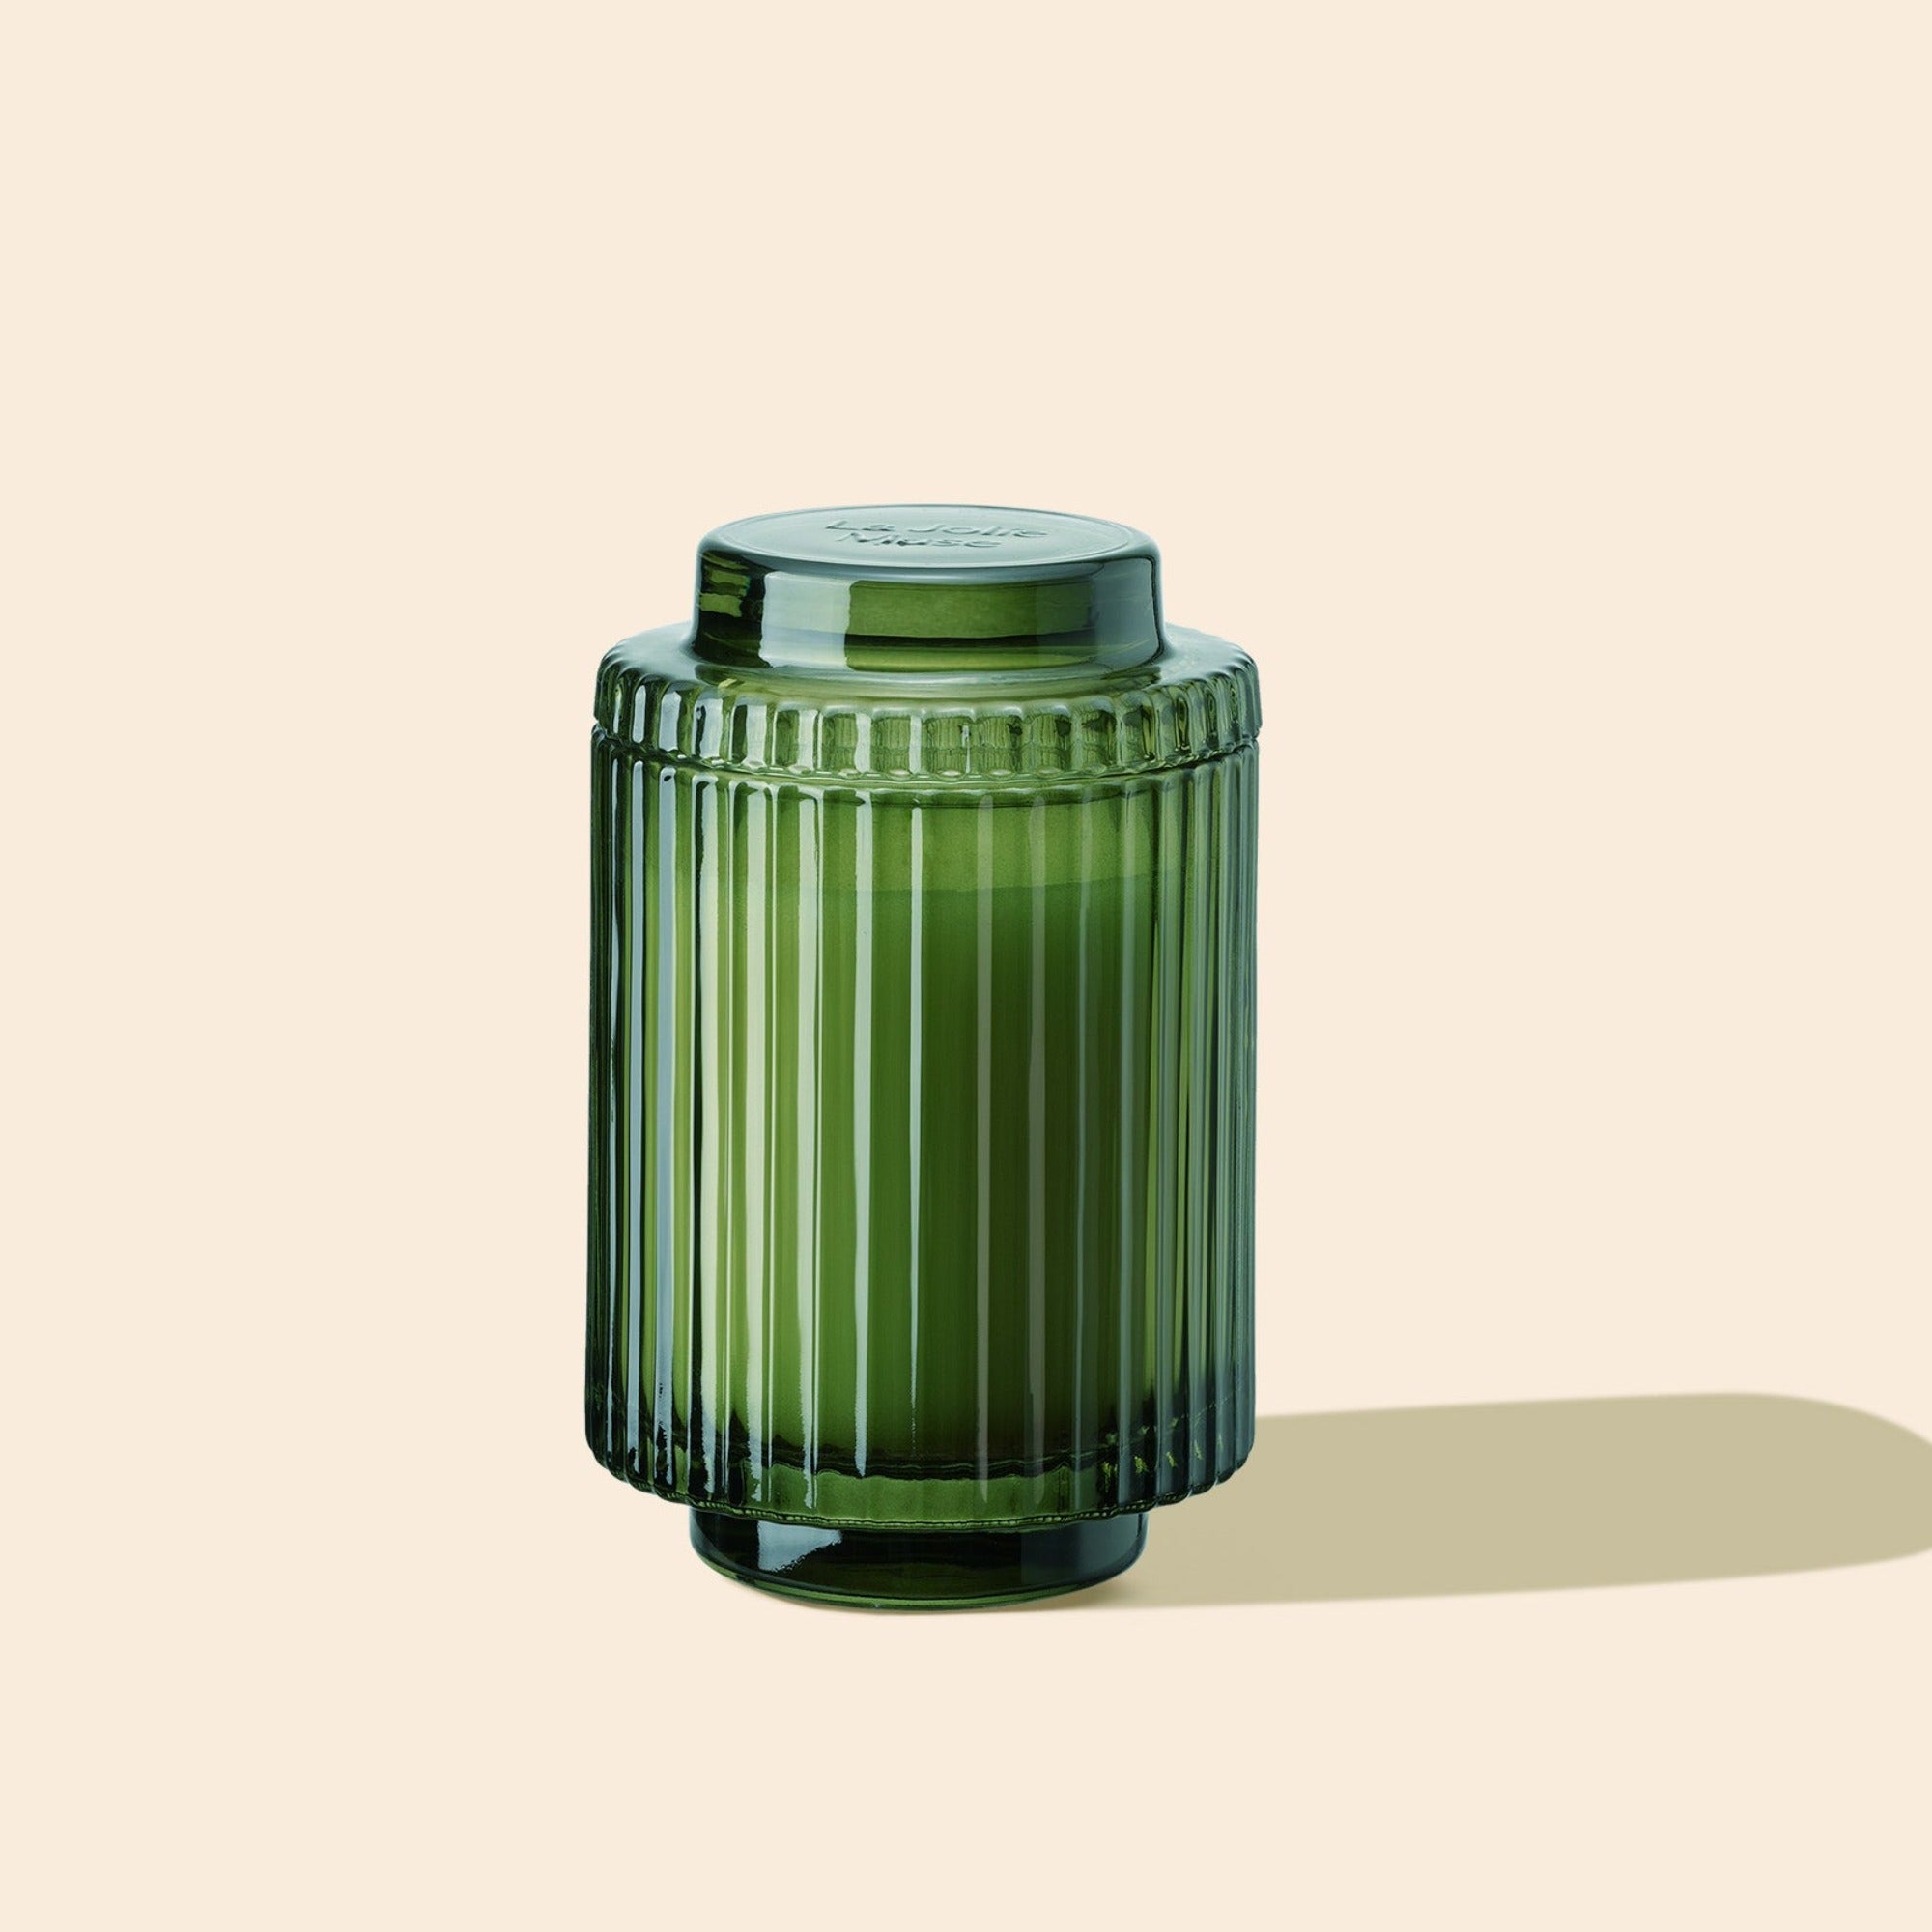 Product Shot of Amélie - Mandarin Matcha 7oz candle in the middle